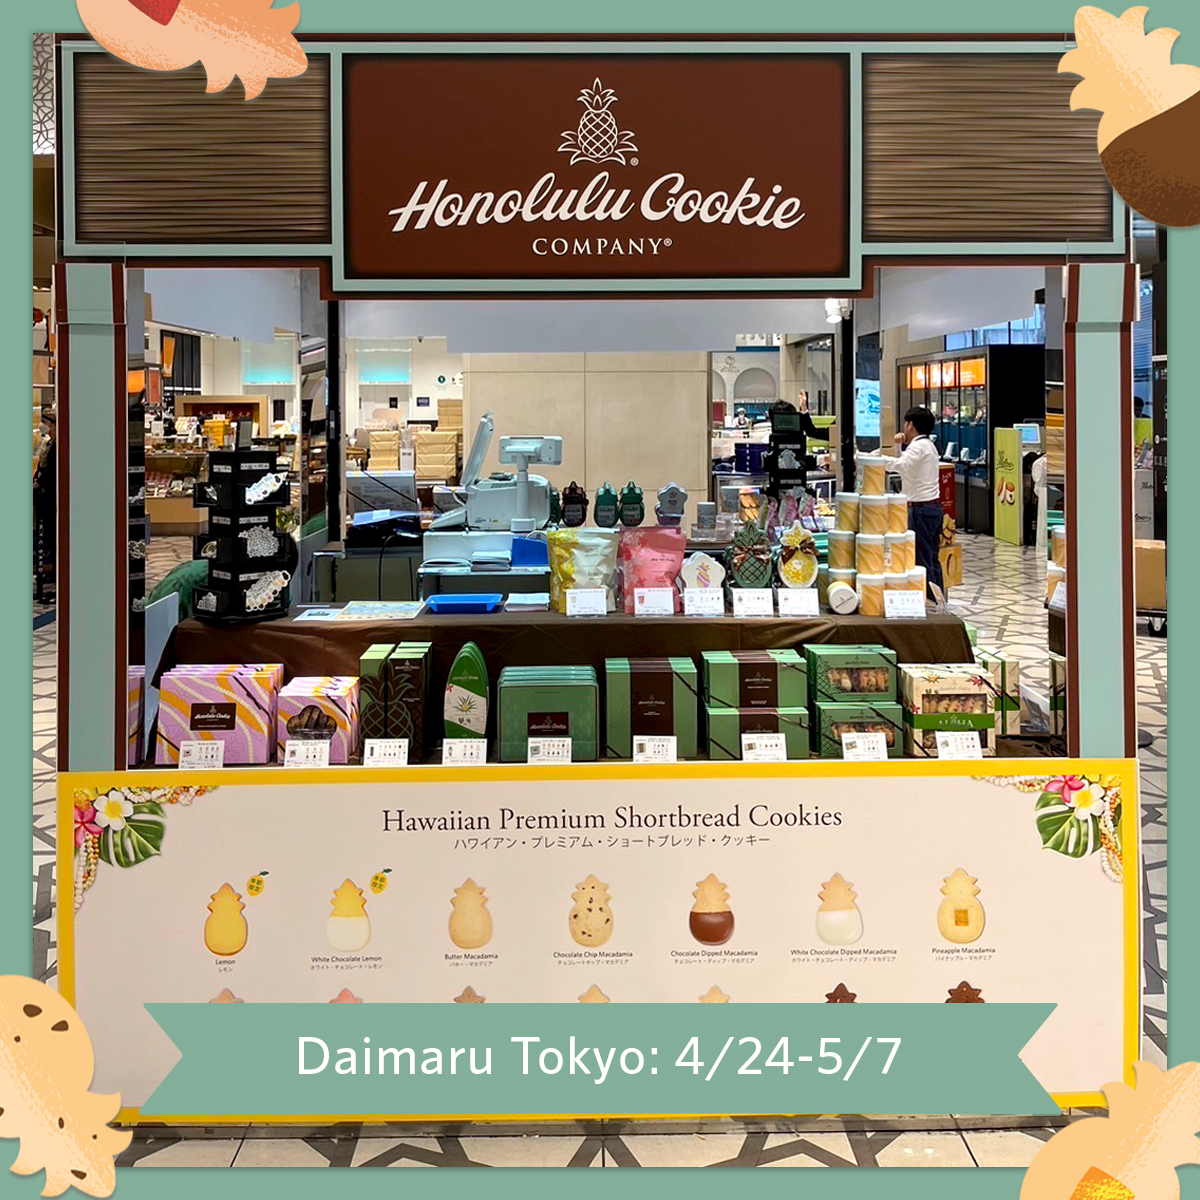 Japan, we’re bringing the flavors of Hawaii to you! We’re at Daimaru Tokyo, now thru May 7th, located at MVP, Tokyo Daimaru 1st floor. Discover the perfect gift with flavors like guava, mango, and coconut! Stop in and shop, while supplies last.